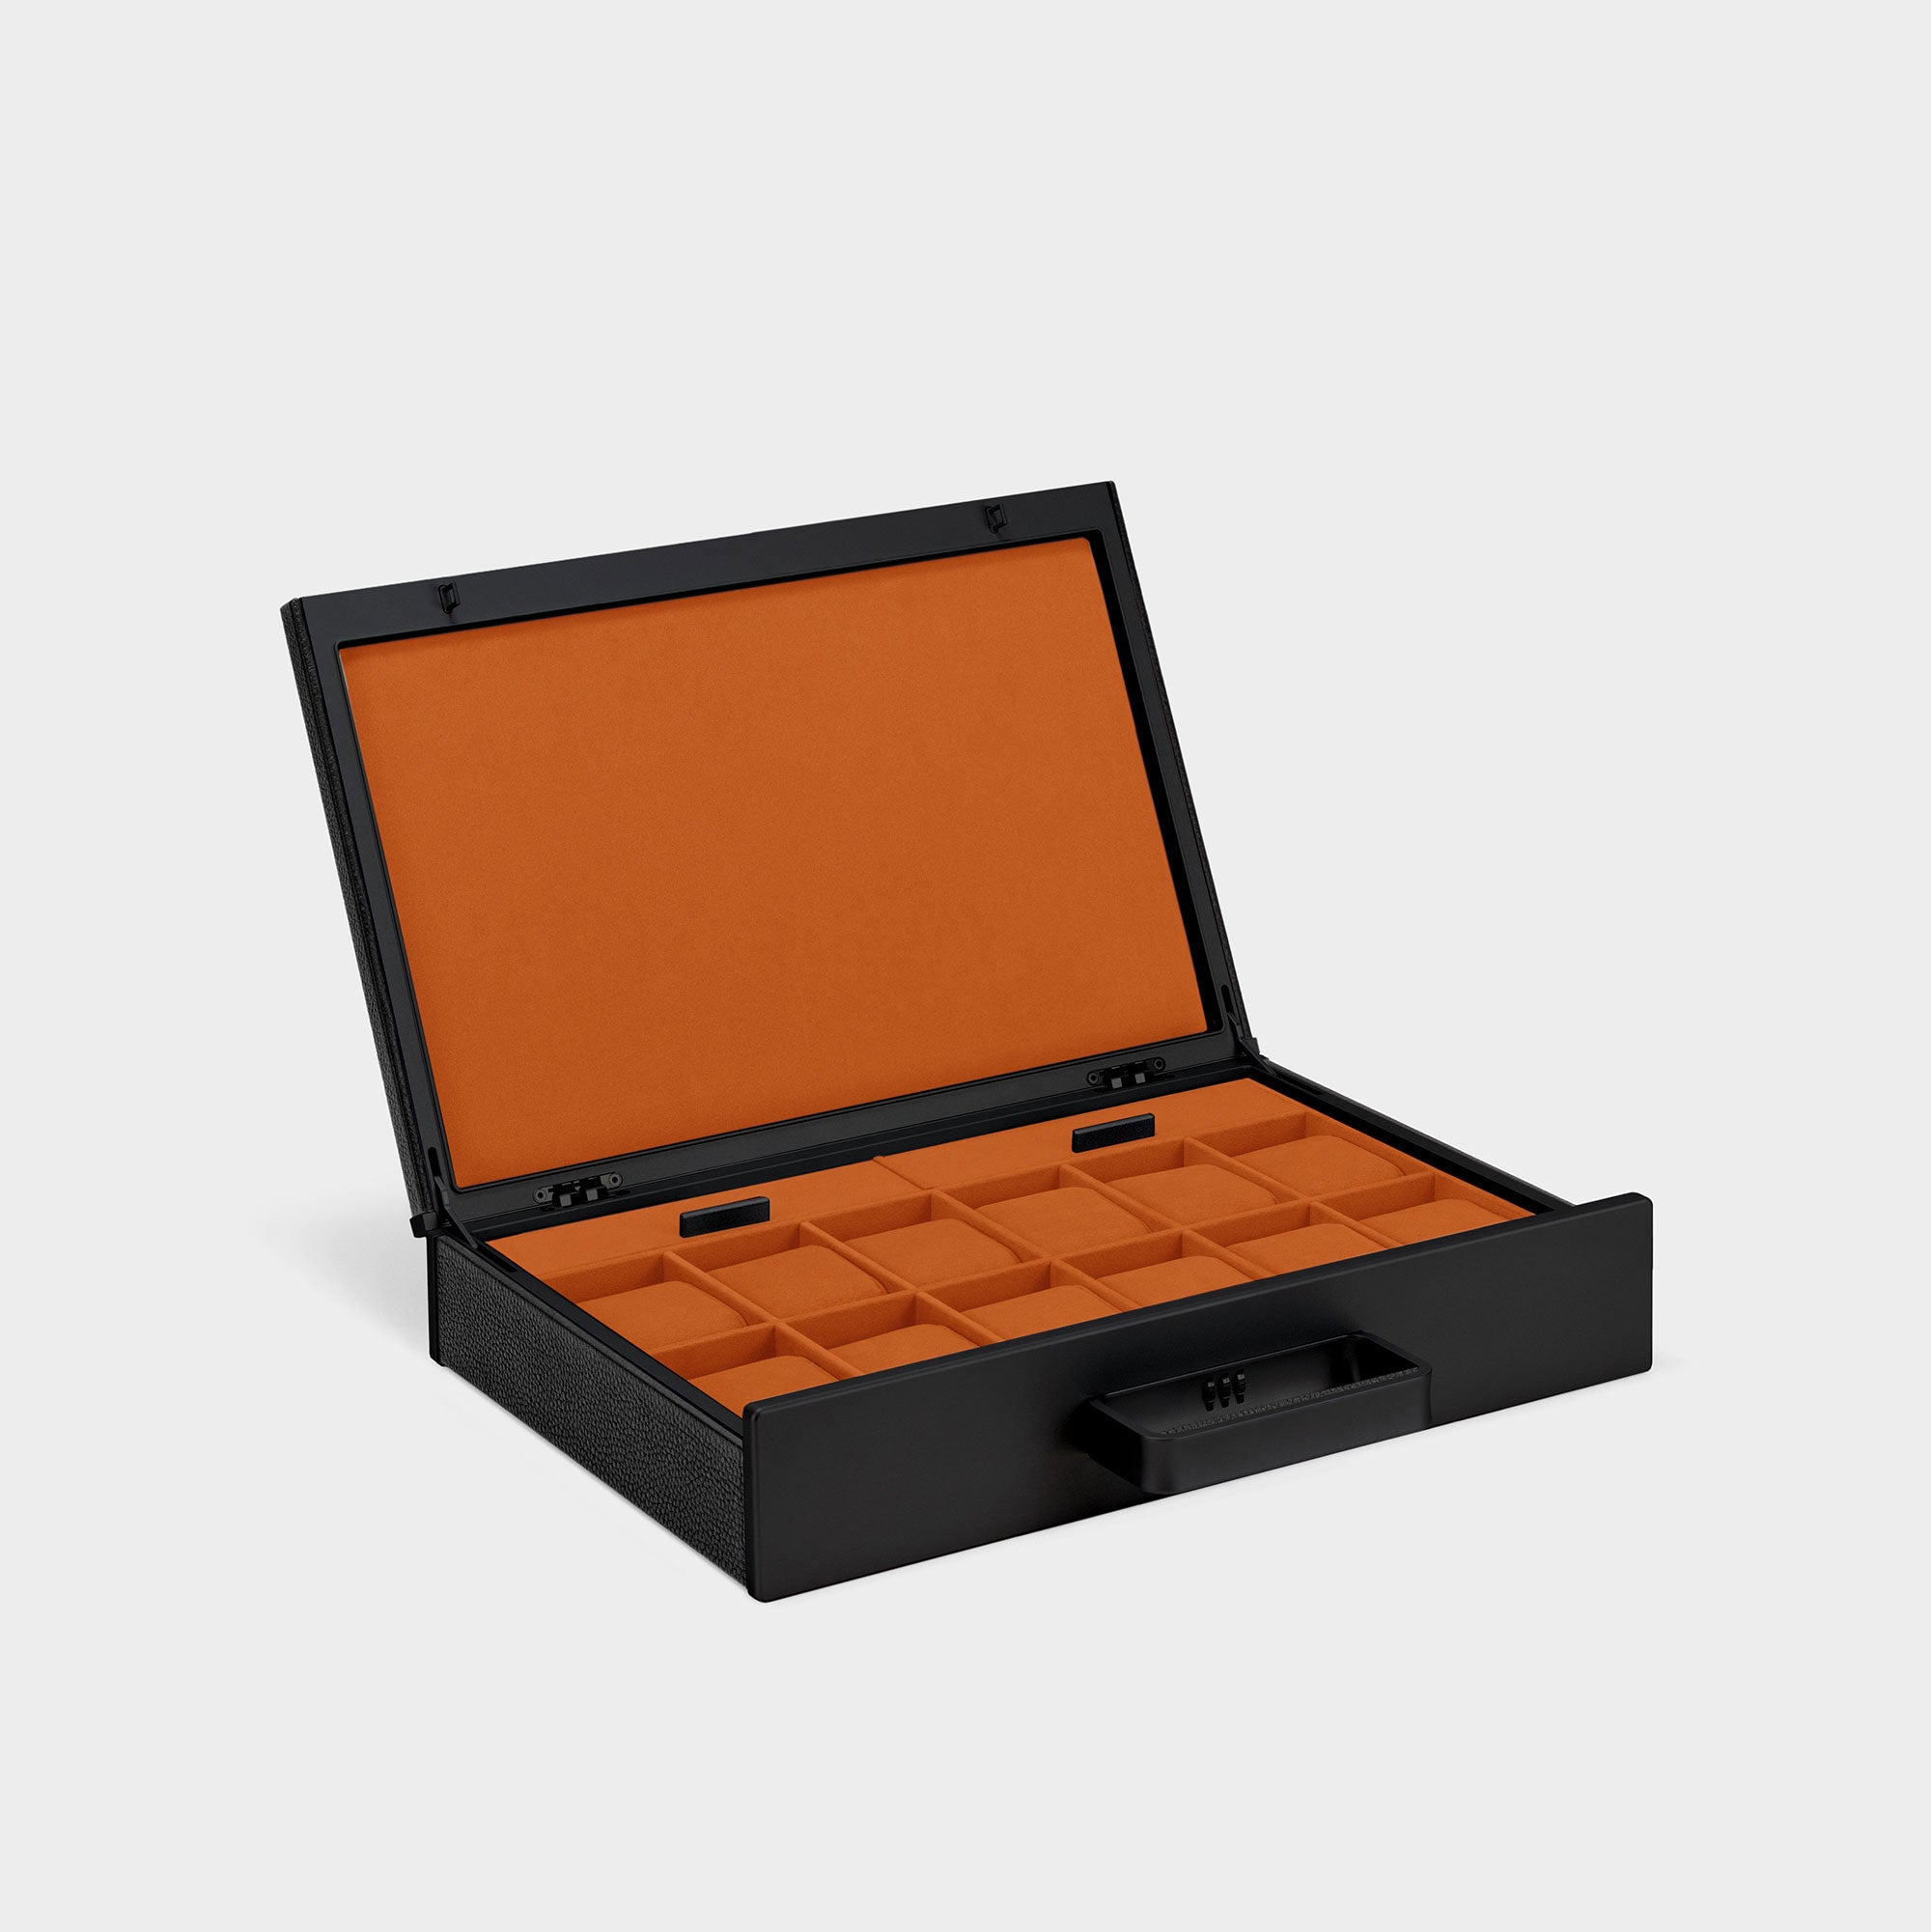 Charles Simon Mackenzie 12 luxury watch briefcase in all black with Papaya orange interior made from fine leather, aluminum and carbon fiber casing and soft Alcantara interior lining